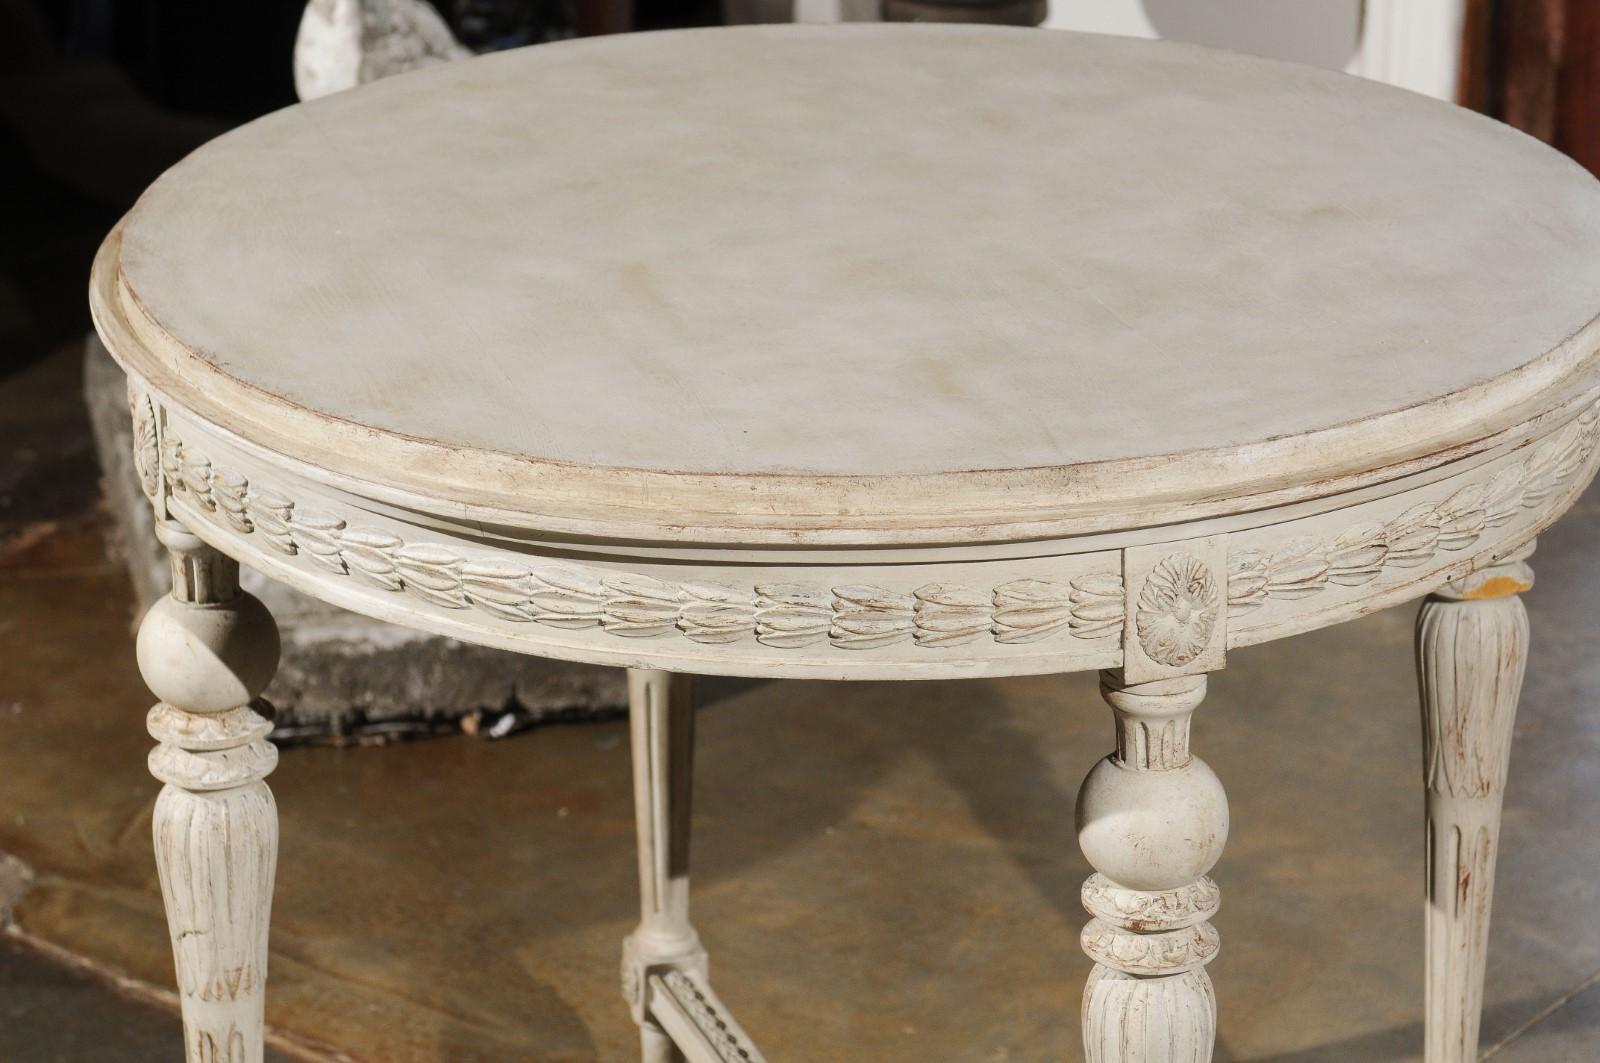 Swedish Gustavian Style Painted Wood Round Table with Carved Apron and Legs 5